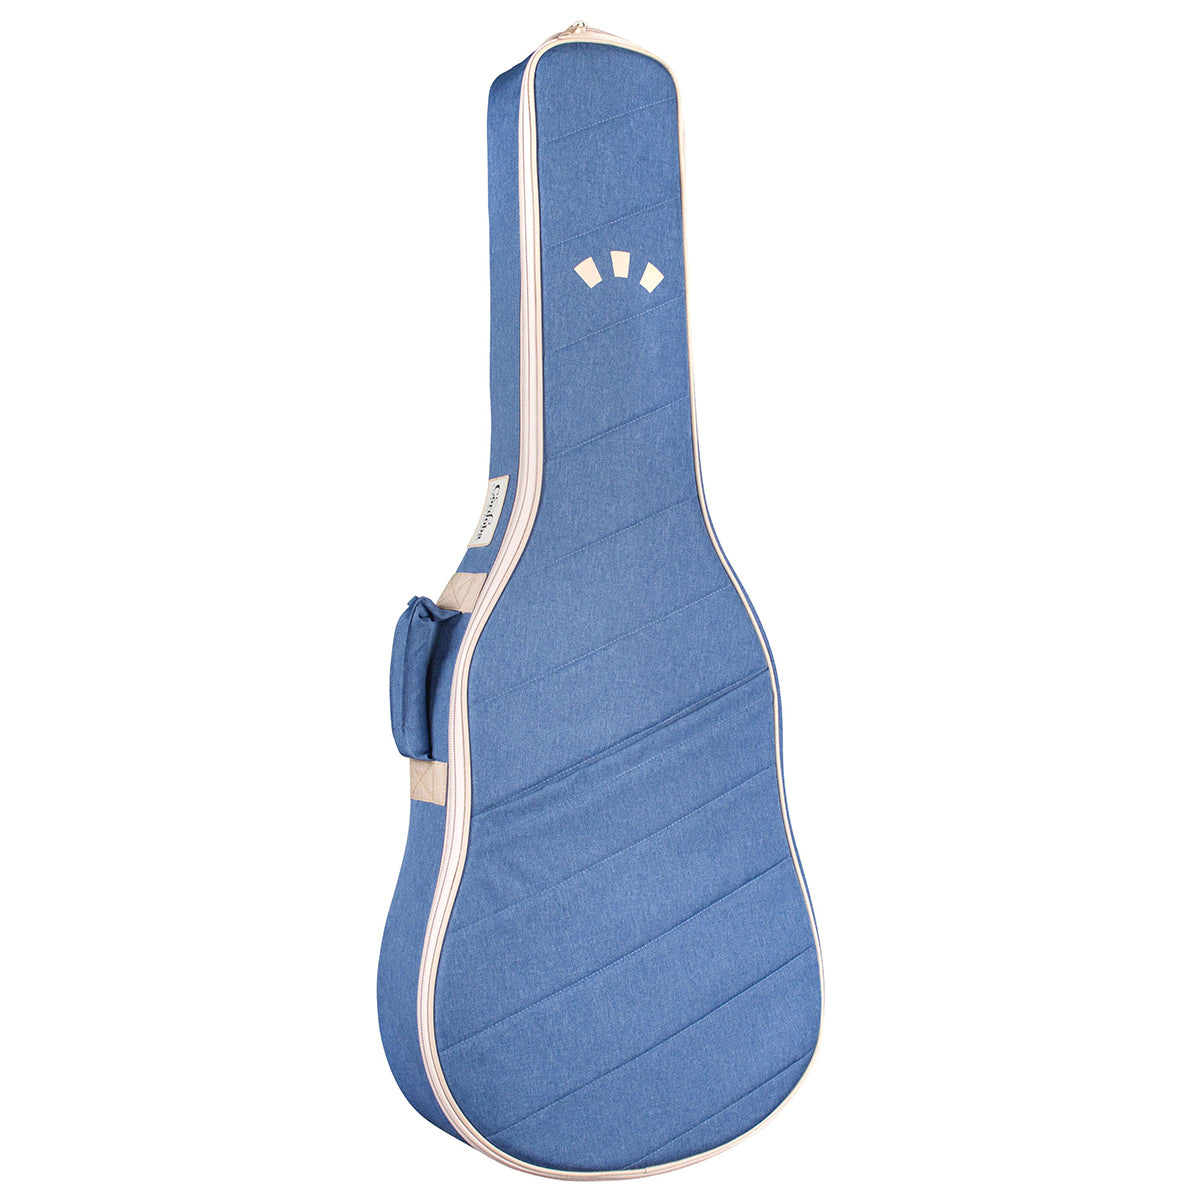 Cordoba Protege C1 Matiz Classical Guitar in Classic Blue with Color-Matching Recycled Nylon Gig Bag